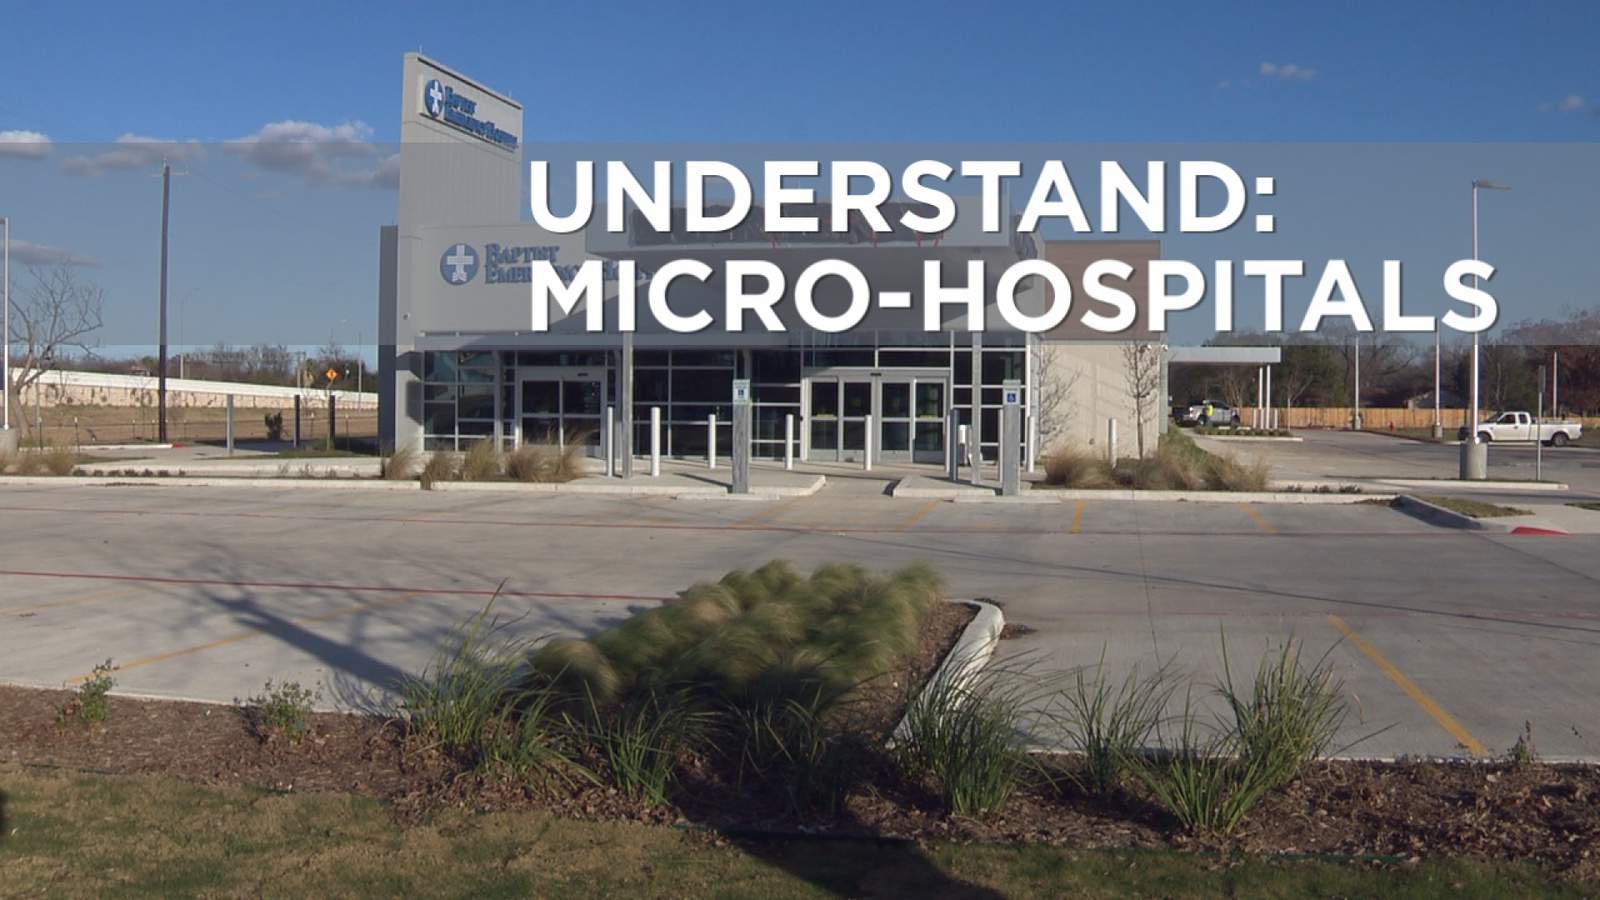 Understand: What are micro-hospitals?